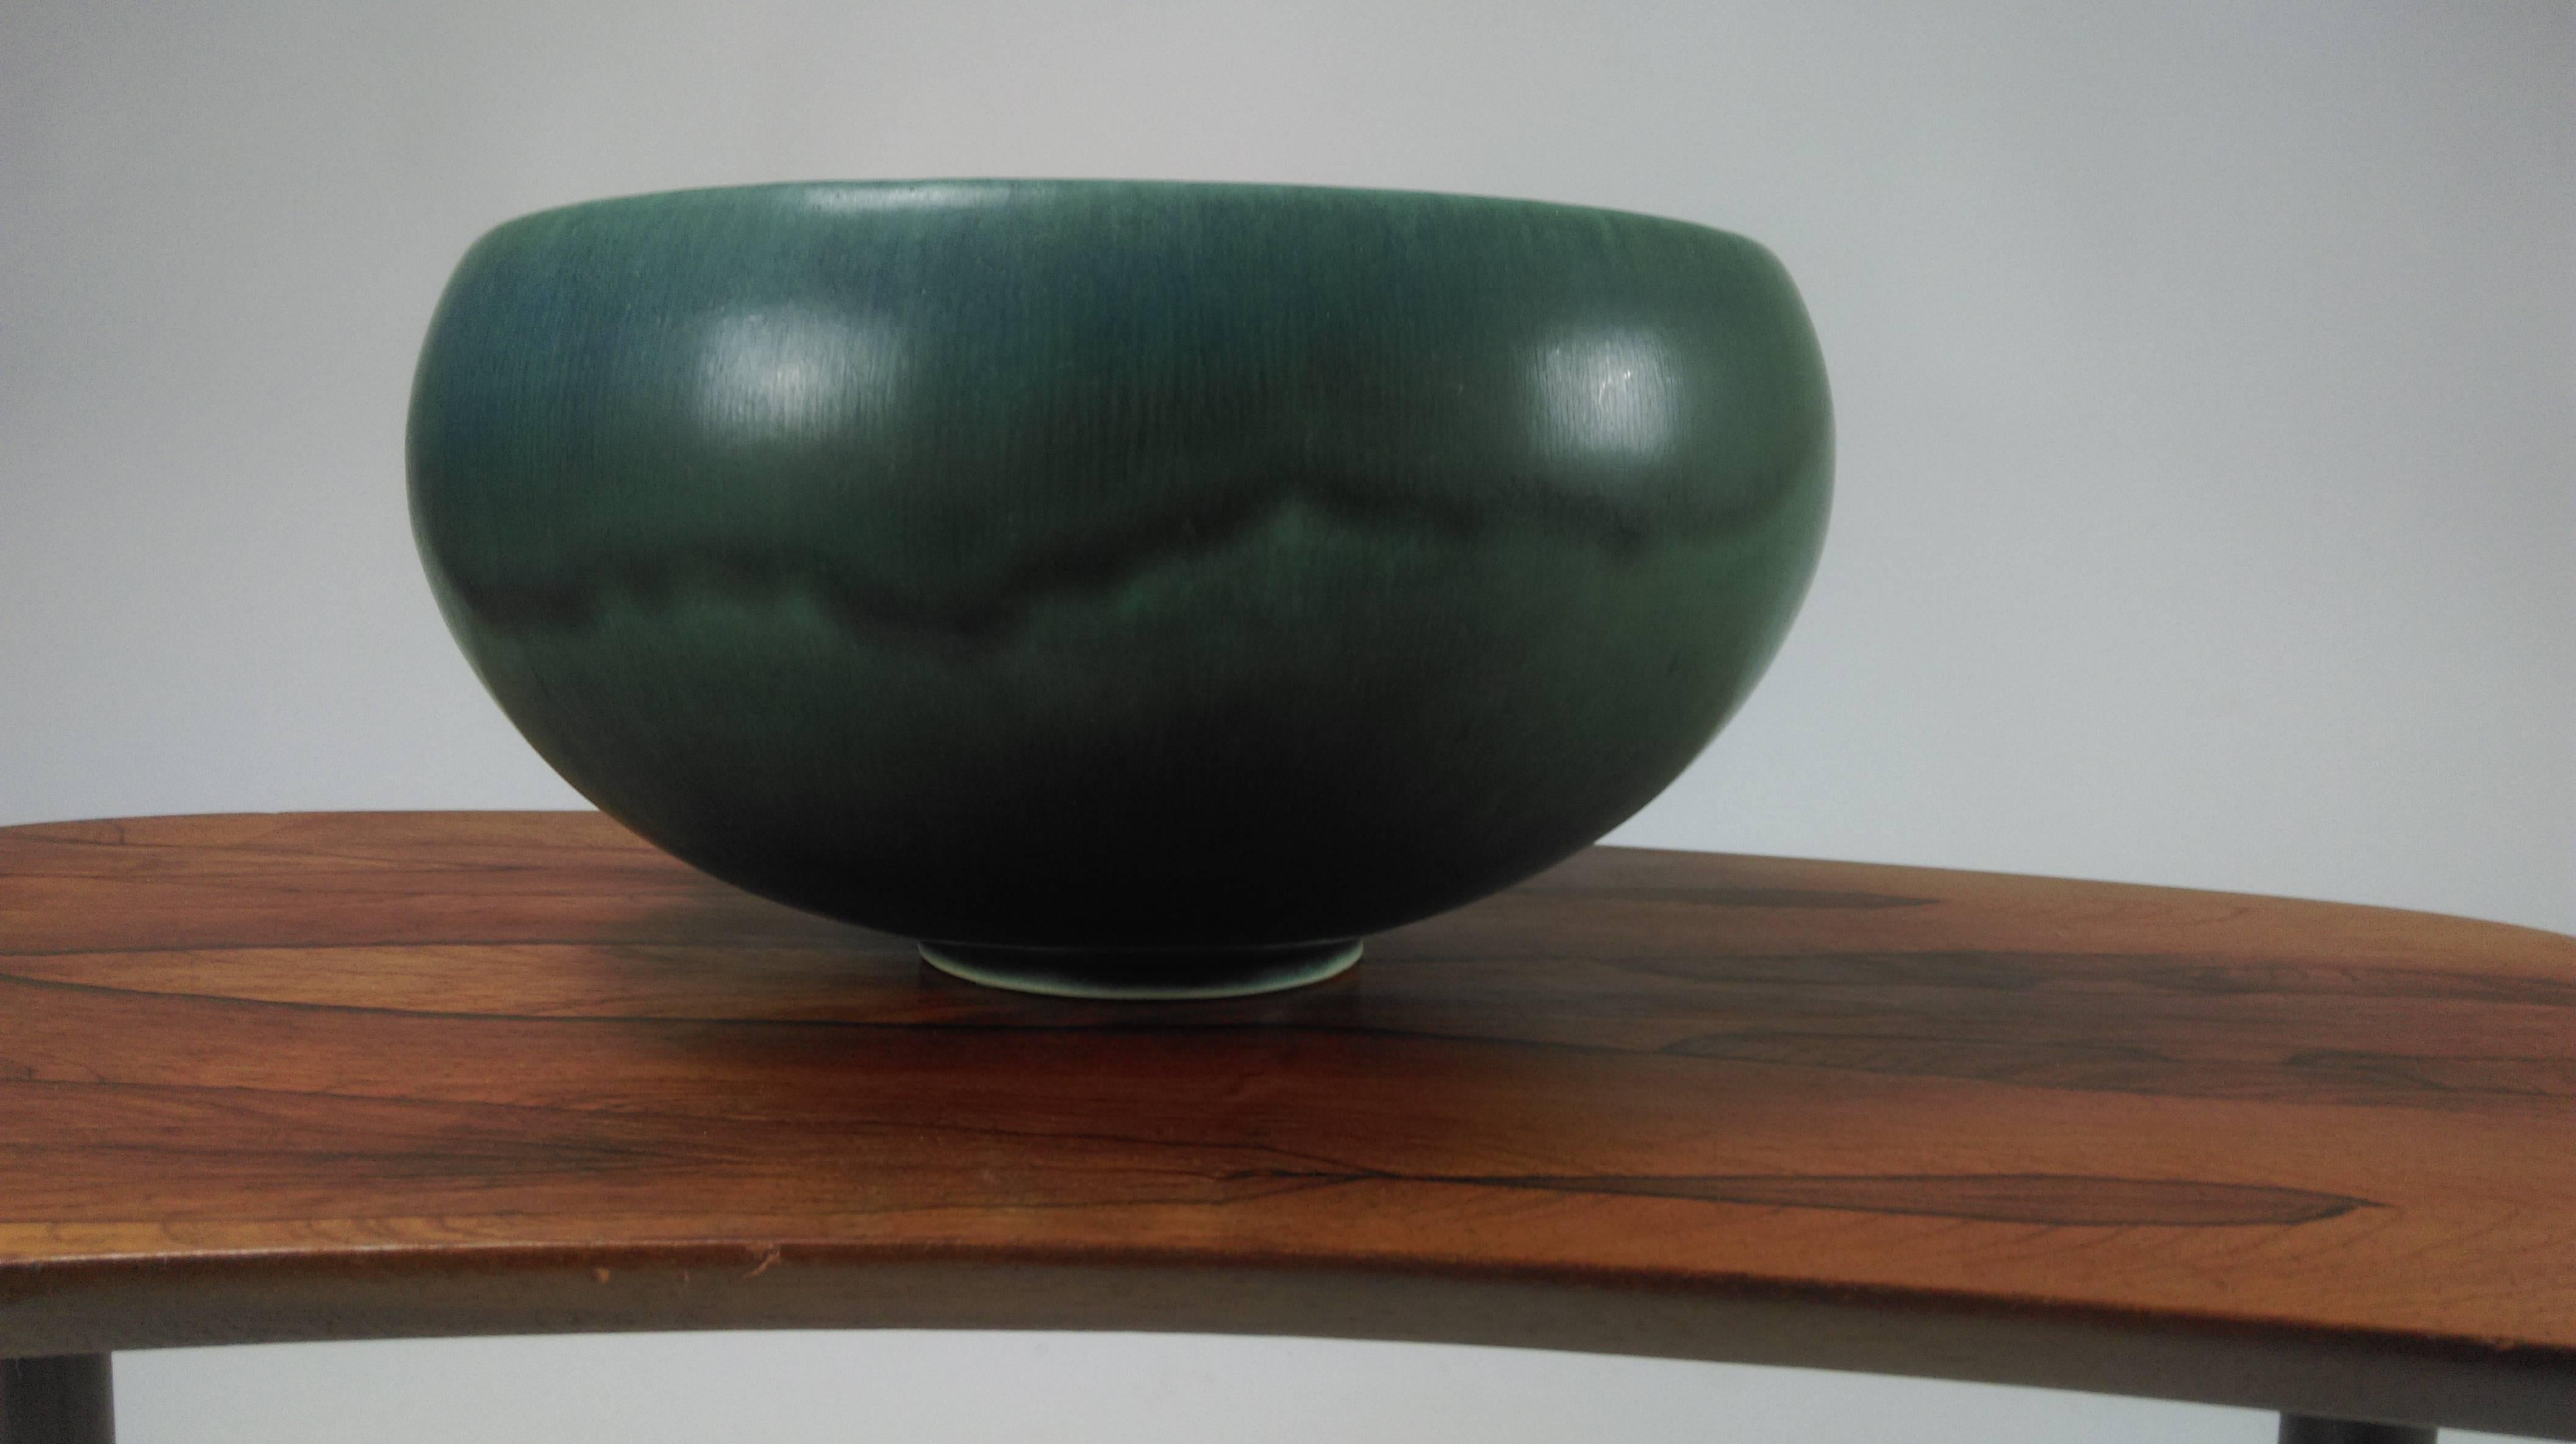 Saxbo, ceramic bowl from the 1950s in Scandinavian modern design with beautiful glaze in green tones.

Bowl is in good condition, minor wear, no cracks or chips.

Stamped with Saxbo logo model number 94.
     